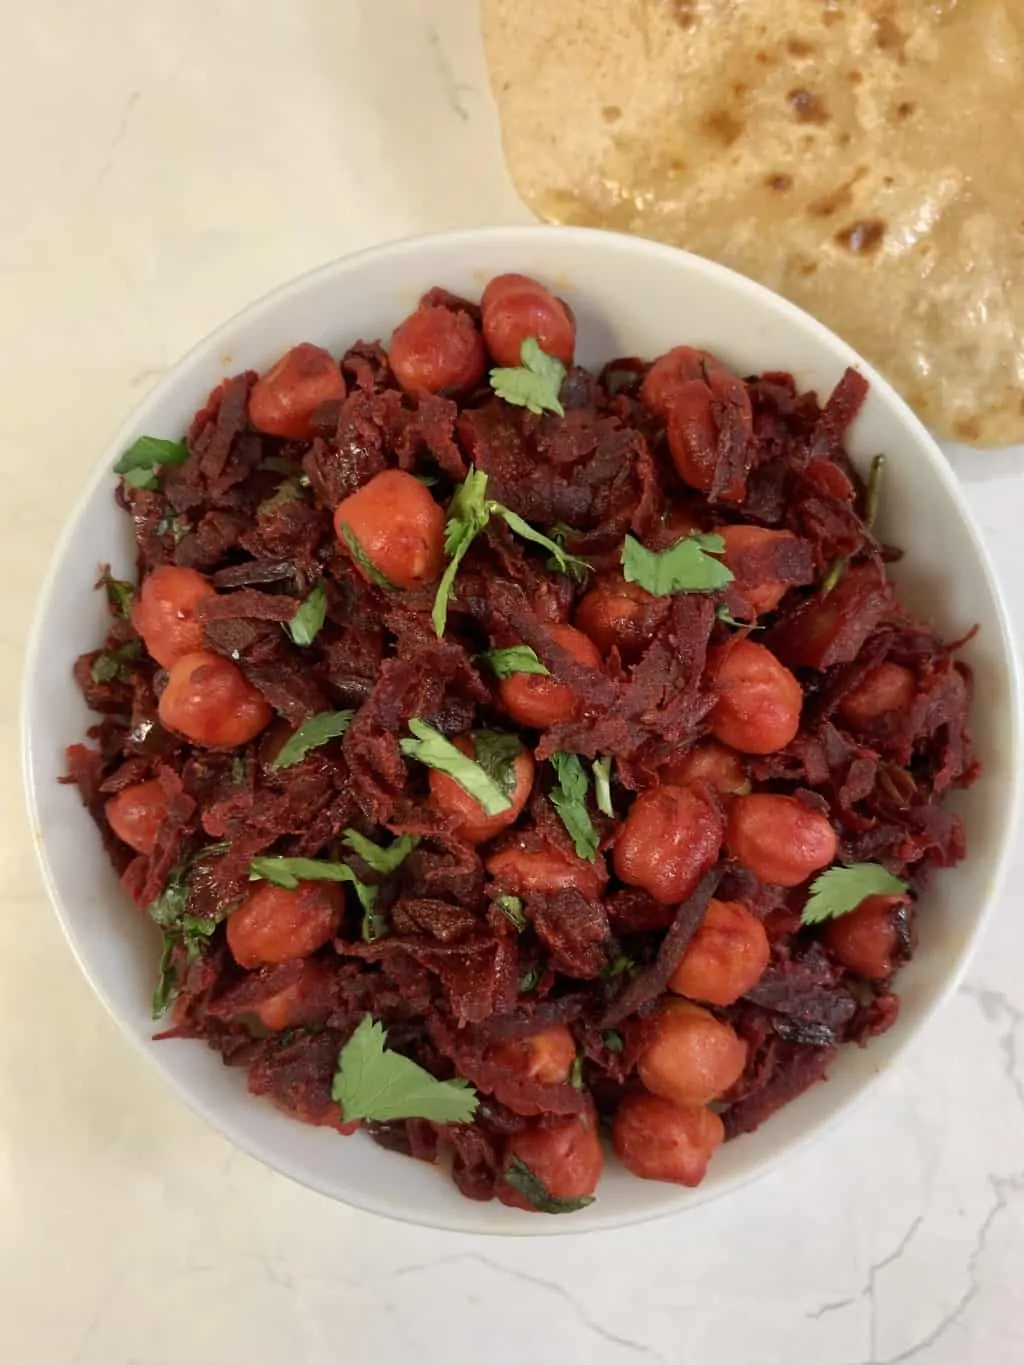 beetroot chickpea stir fry served in a bowl garnished with cilantro with side of chapati